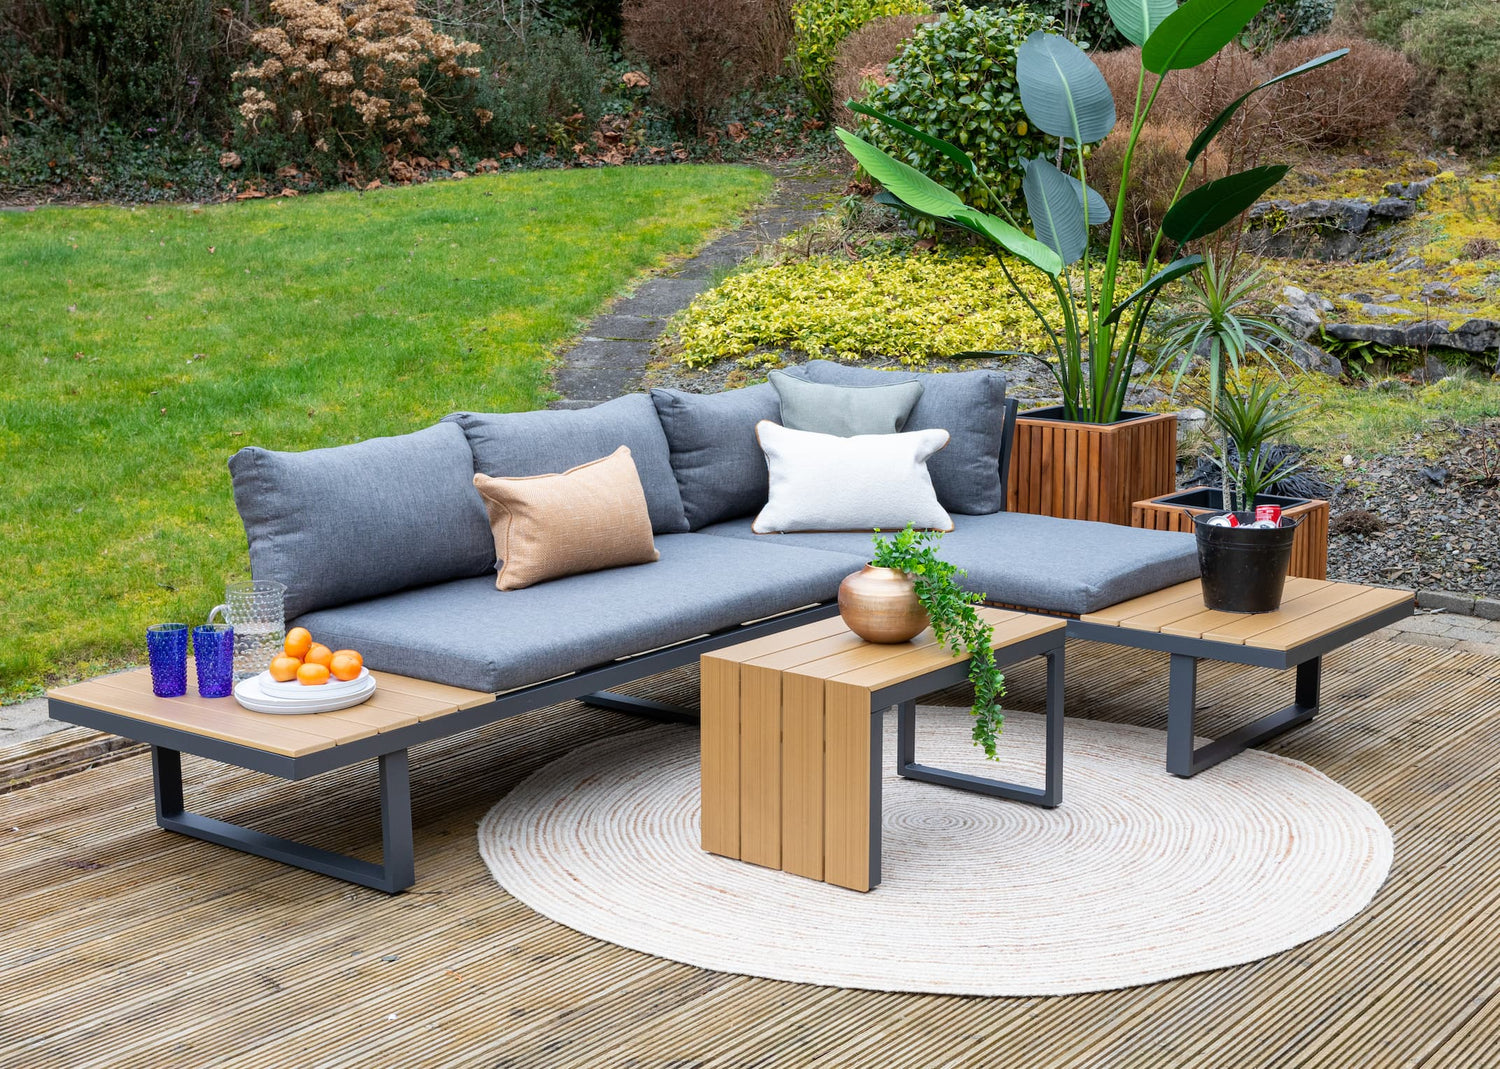 Designing the Ultimate Outdoor Oasis: Decorating with Patio Furniture